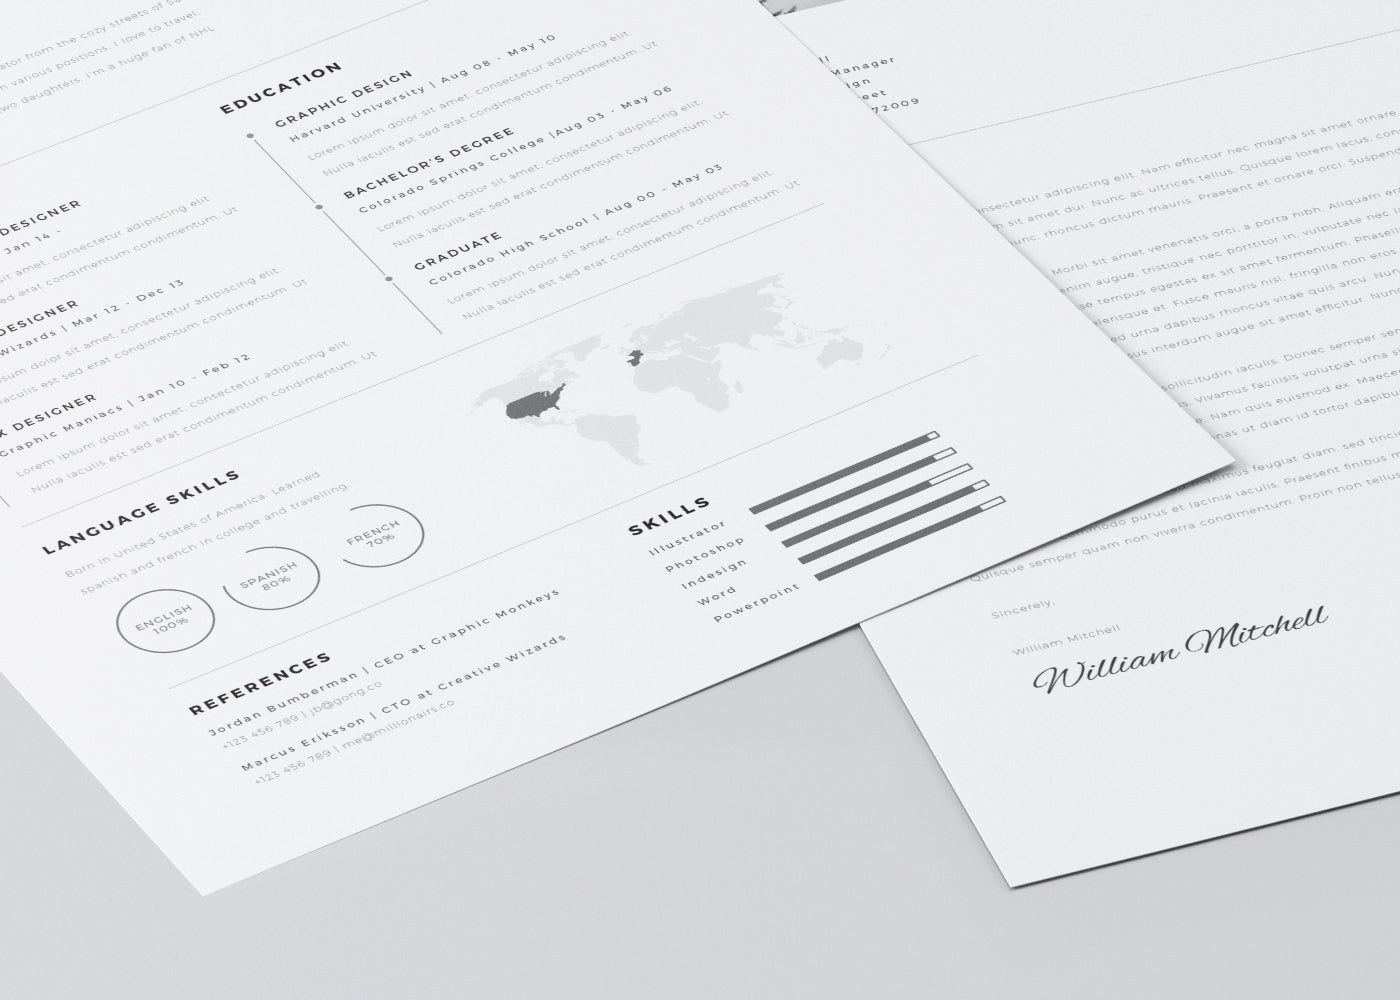 Free Minimalistic and Clean Resume Template in Photoshop (PSD) and Illustrator (AI) Formats